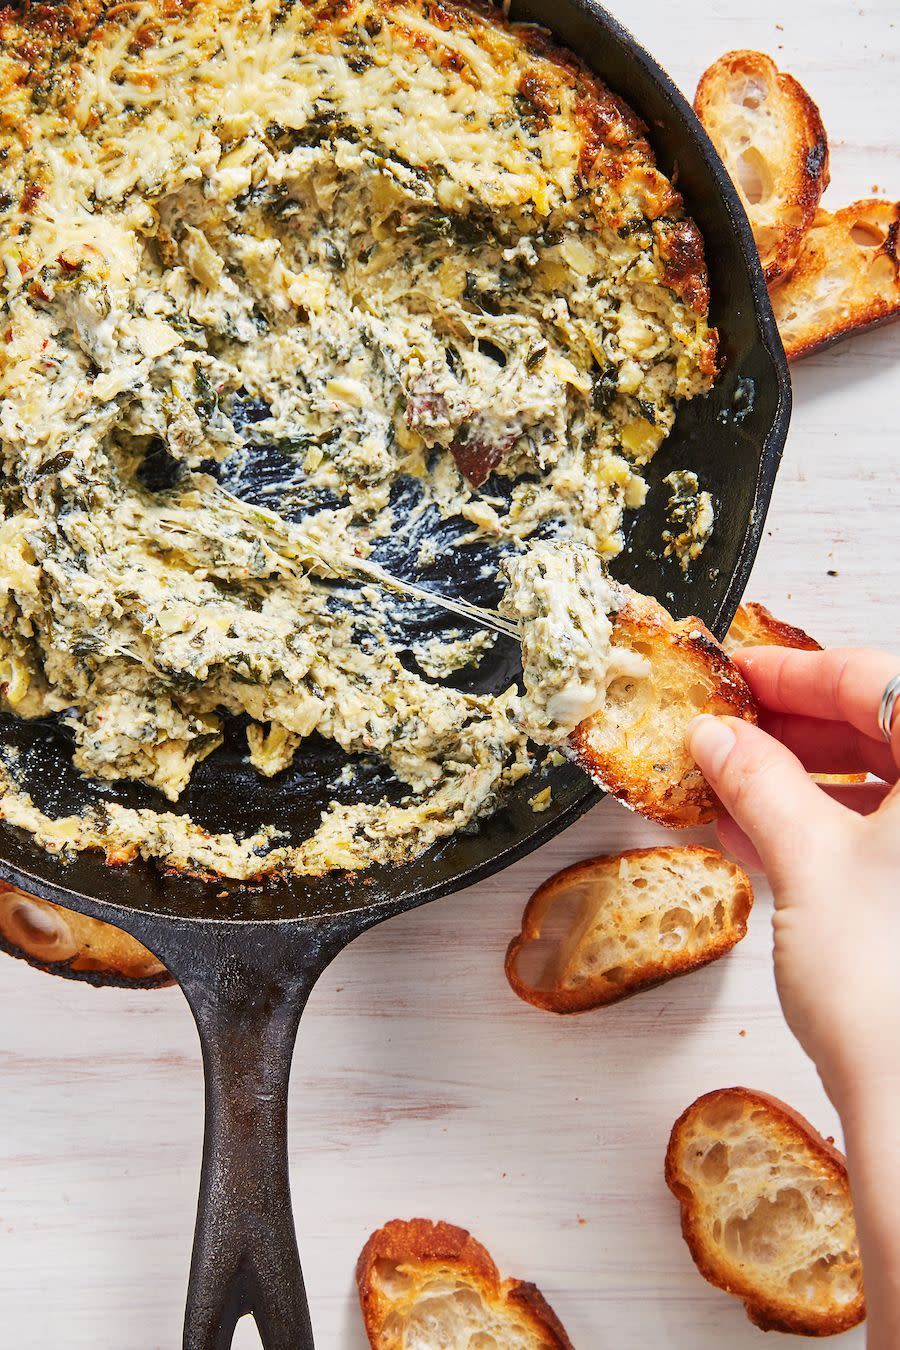 Baked Spinach-Artichoke Dip